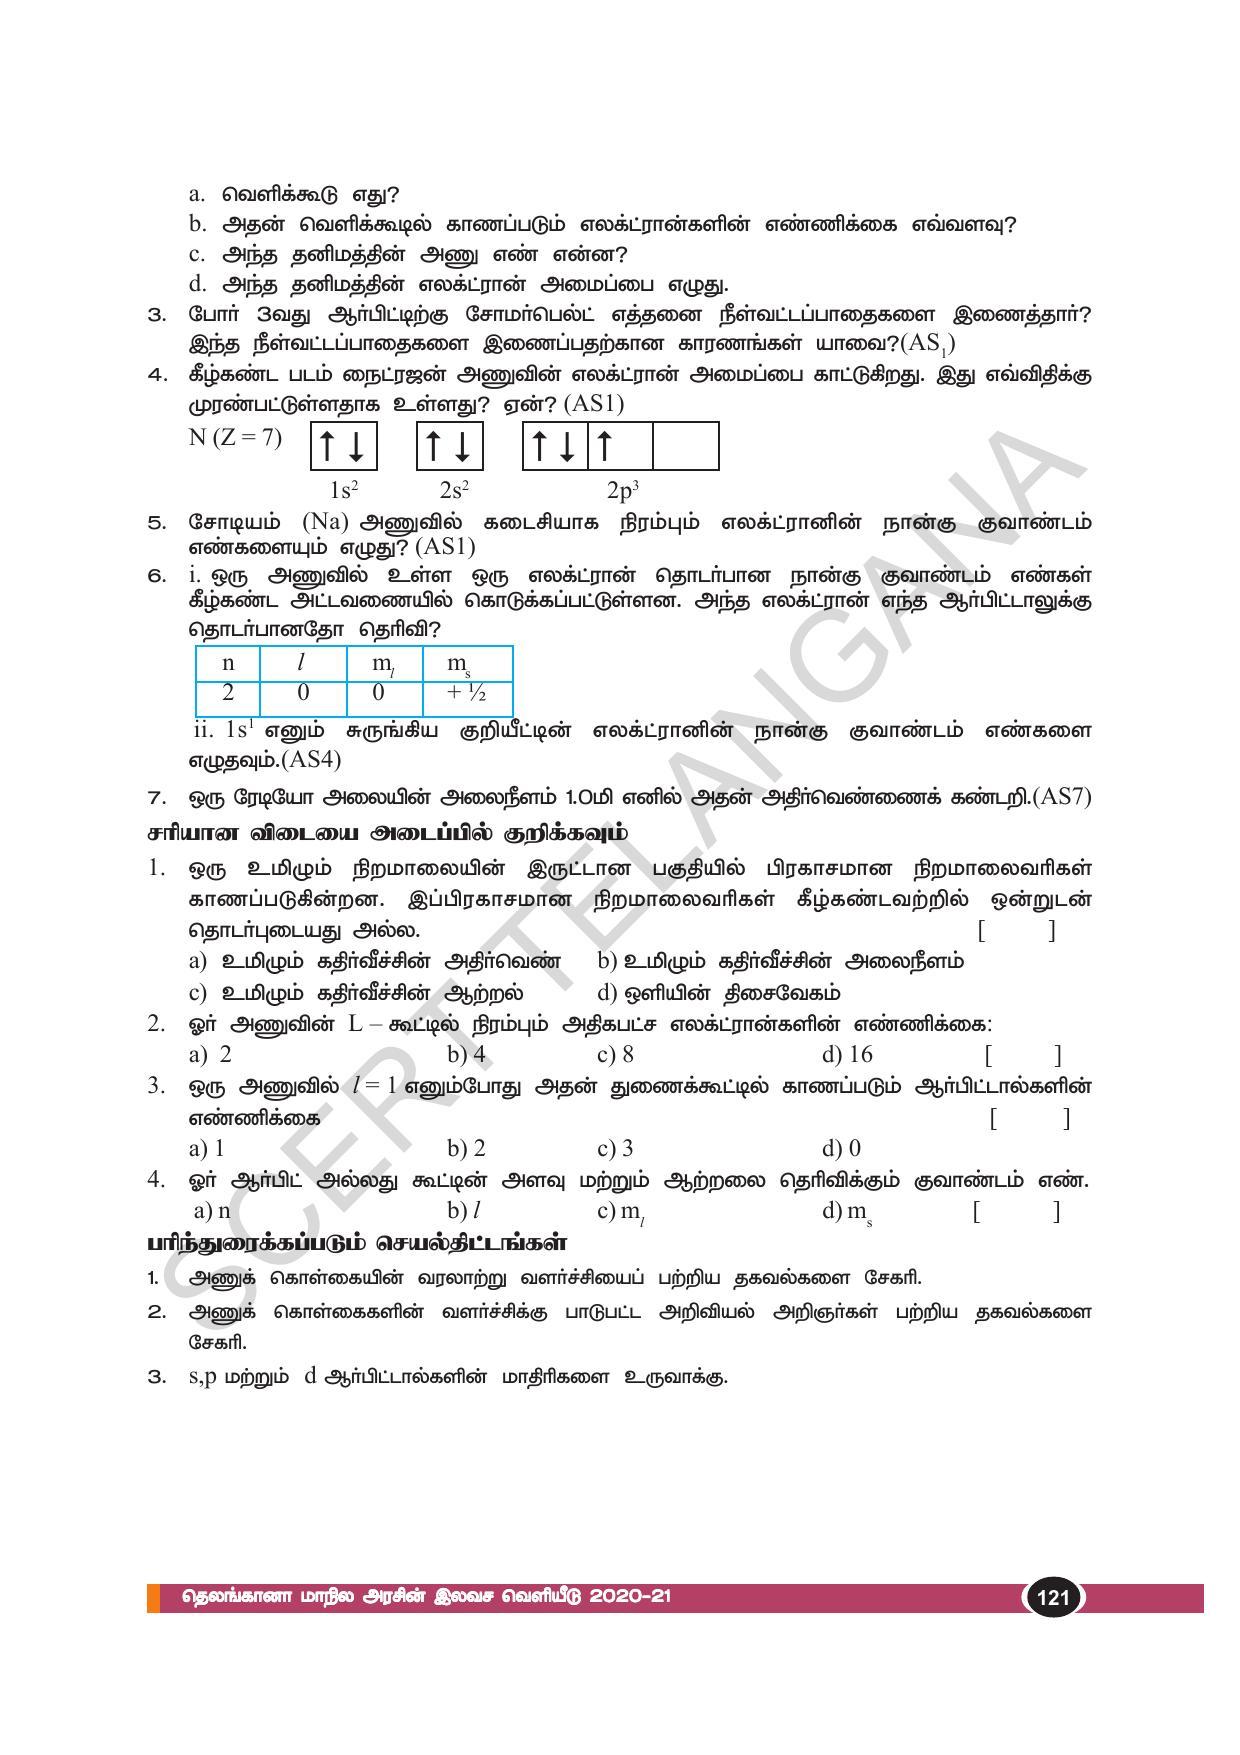 TS SCERT Class 10 Physical Science(Tamil Medium) Text Book - Page 133